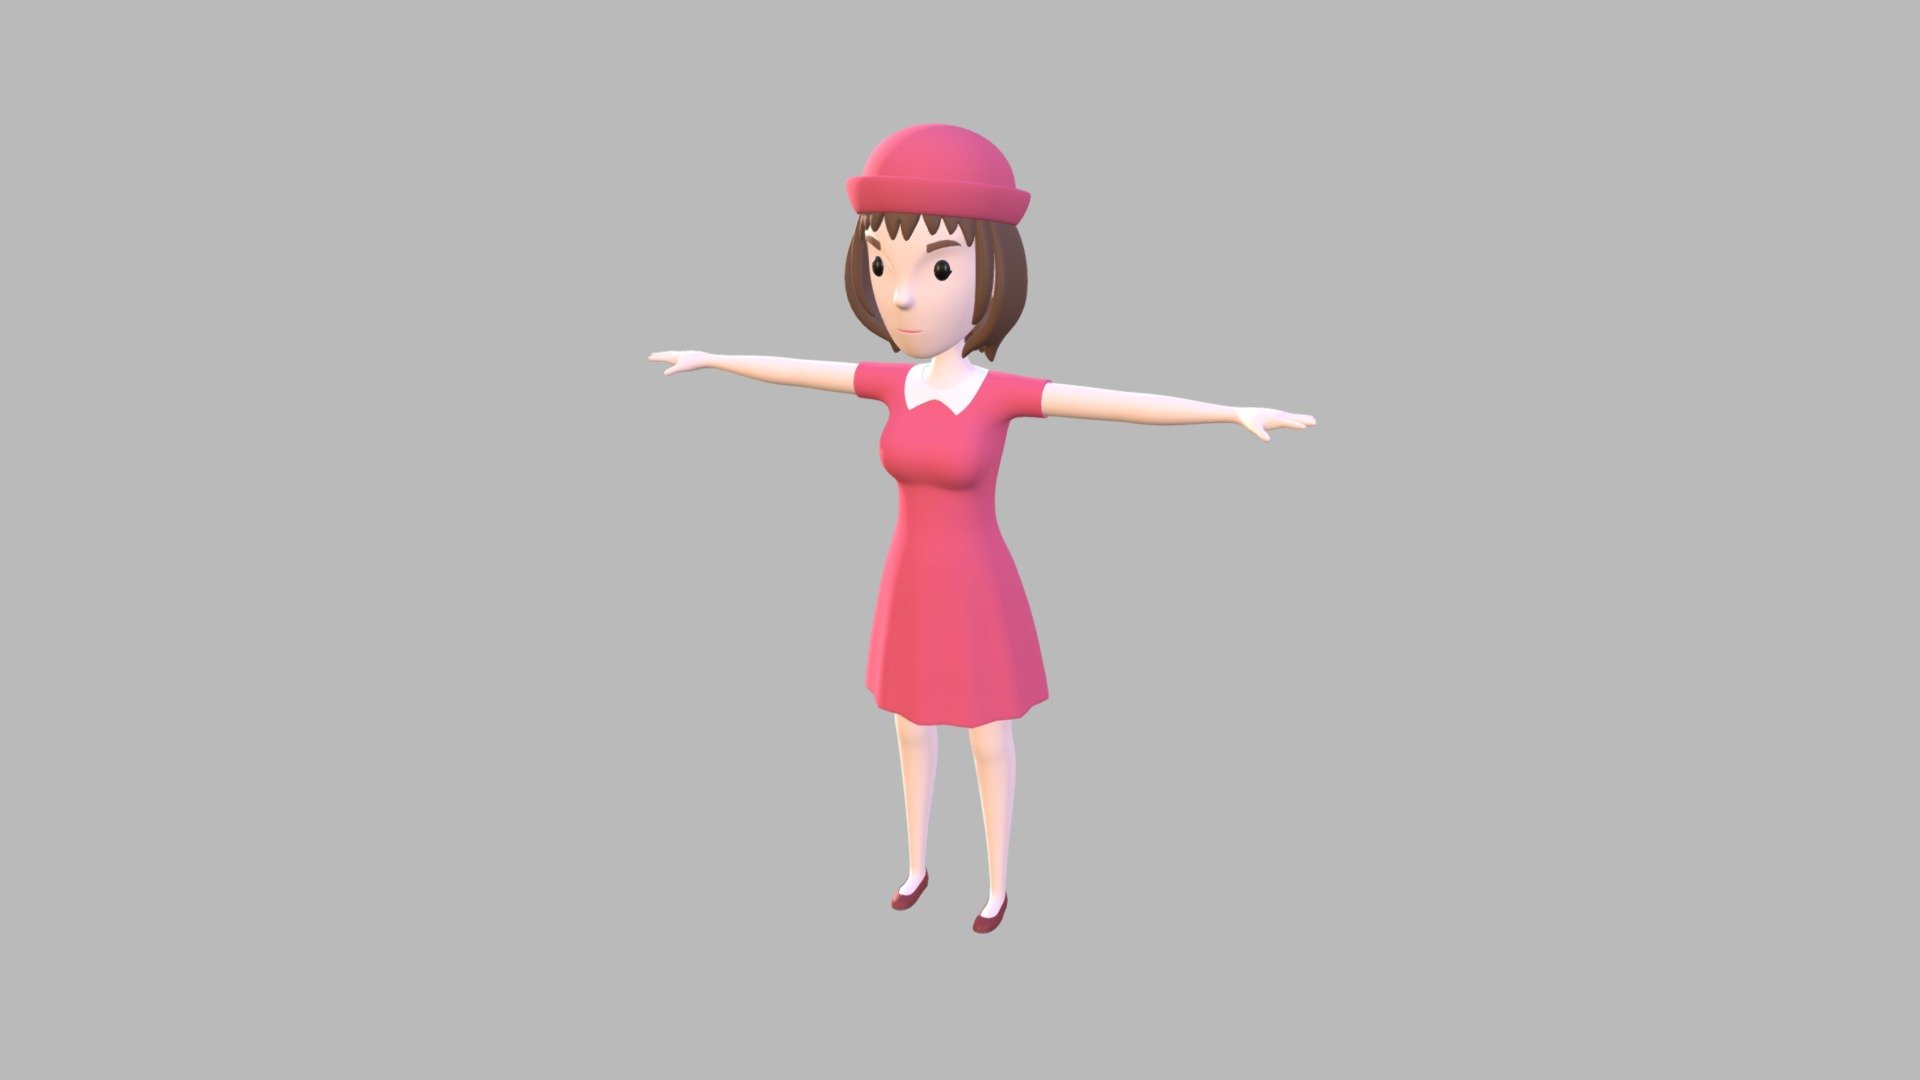 Cartoongirl024 Girl Buy Royalty Free 3d Model By Bariacg [73a9134